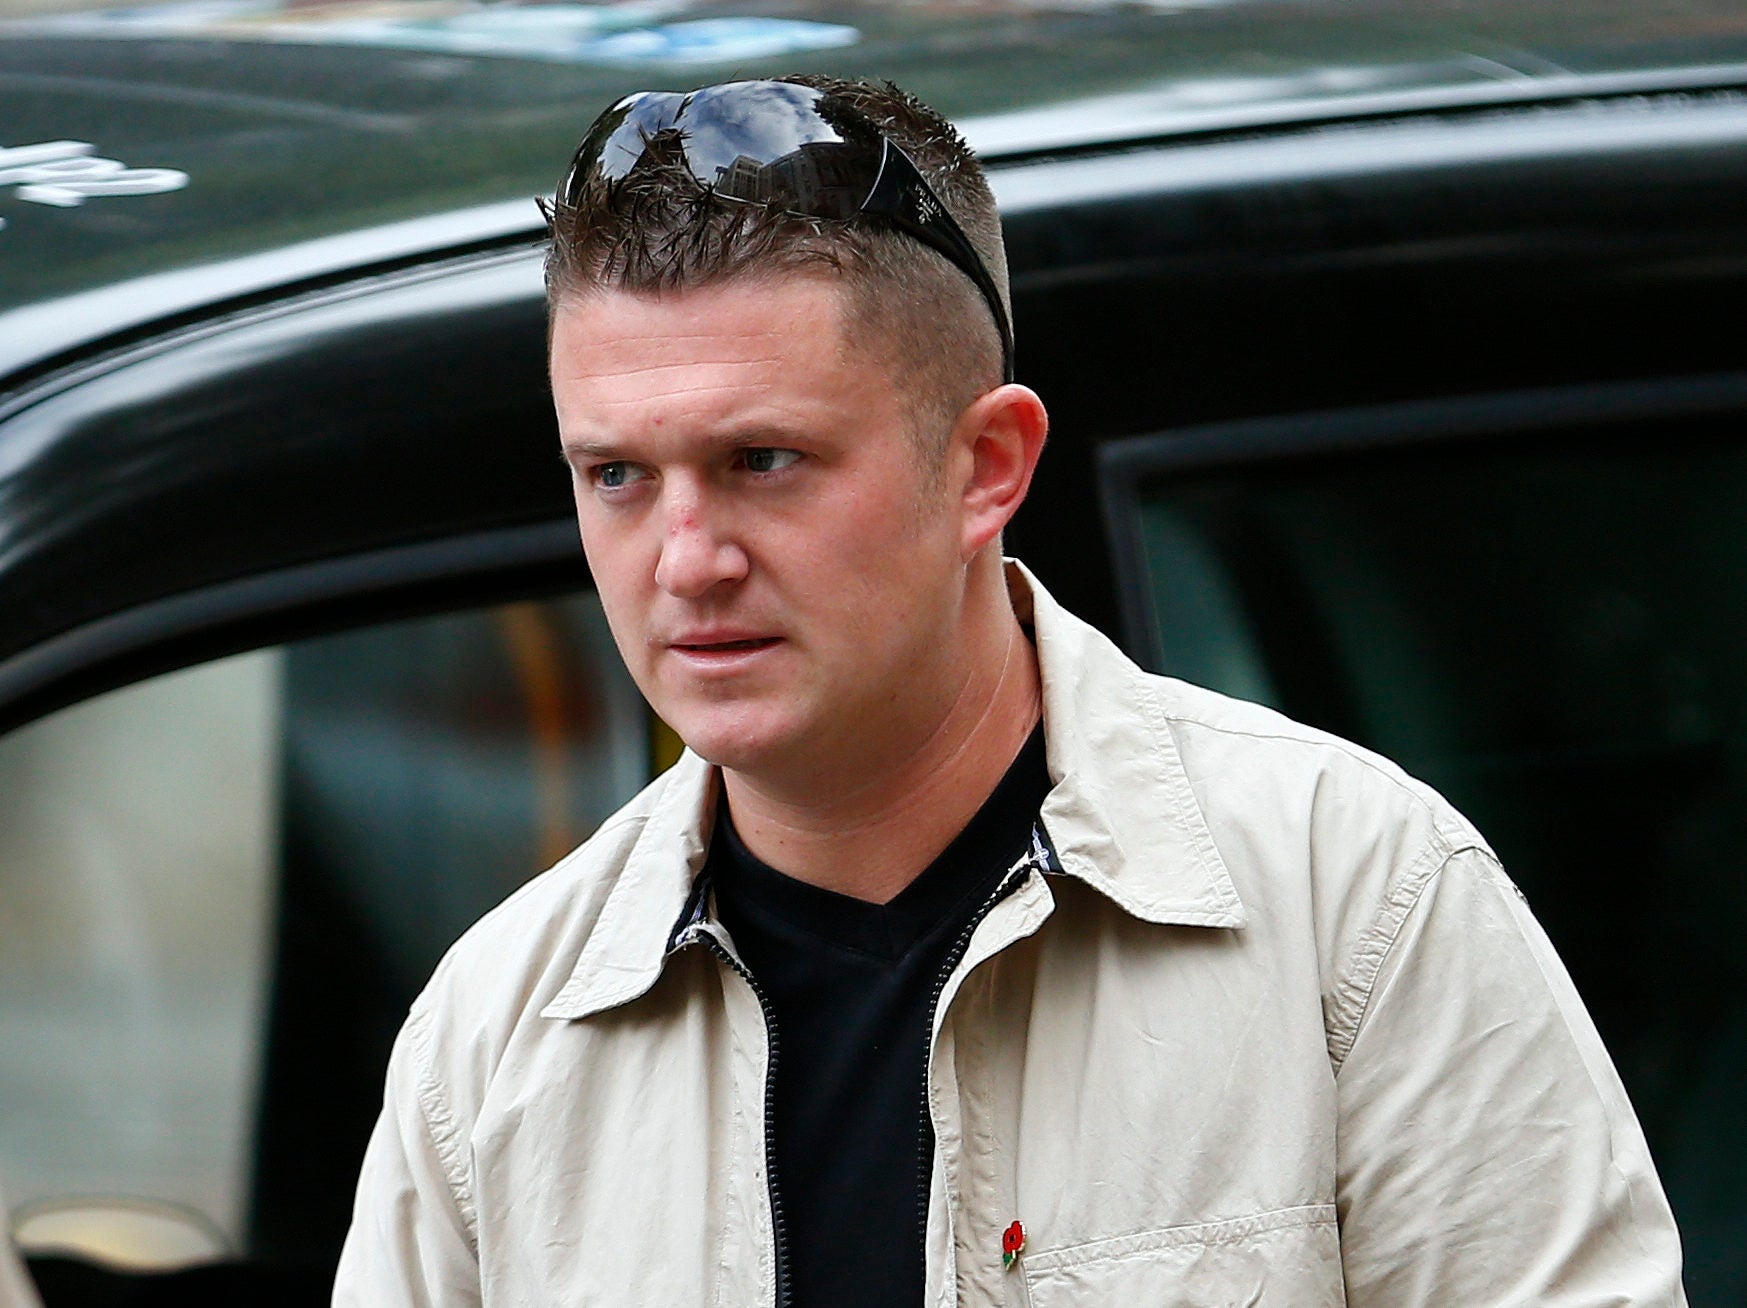 Leeds Live court reporter faced torrent of online abuse over coverage of EDL founder Tommy Robinson's contempt case